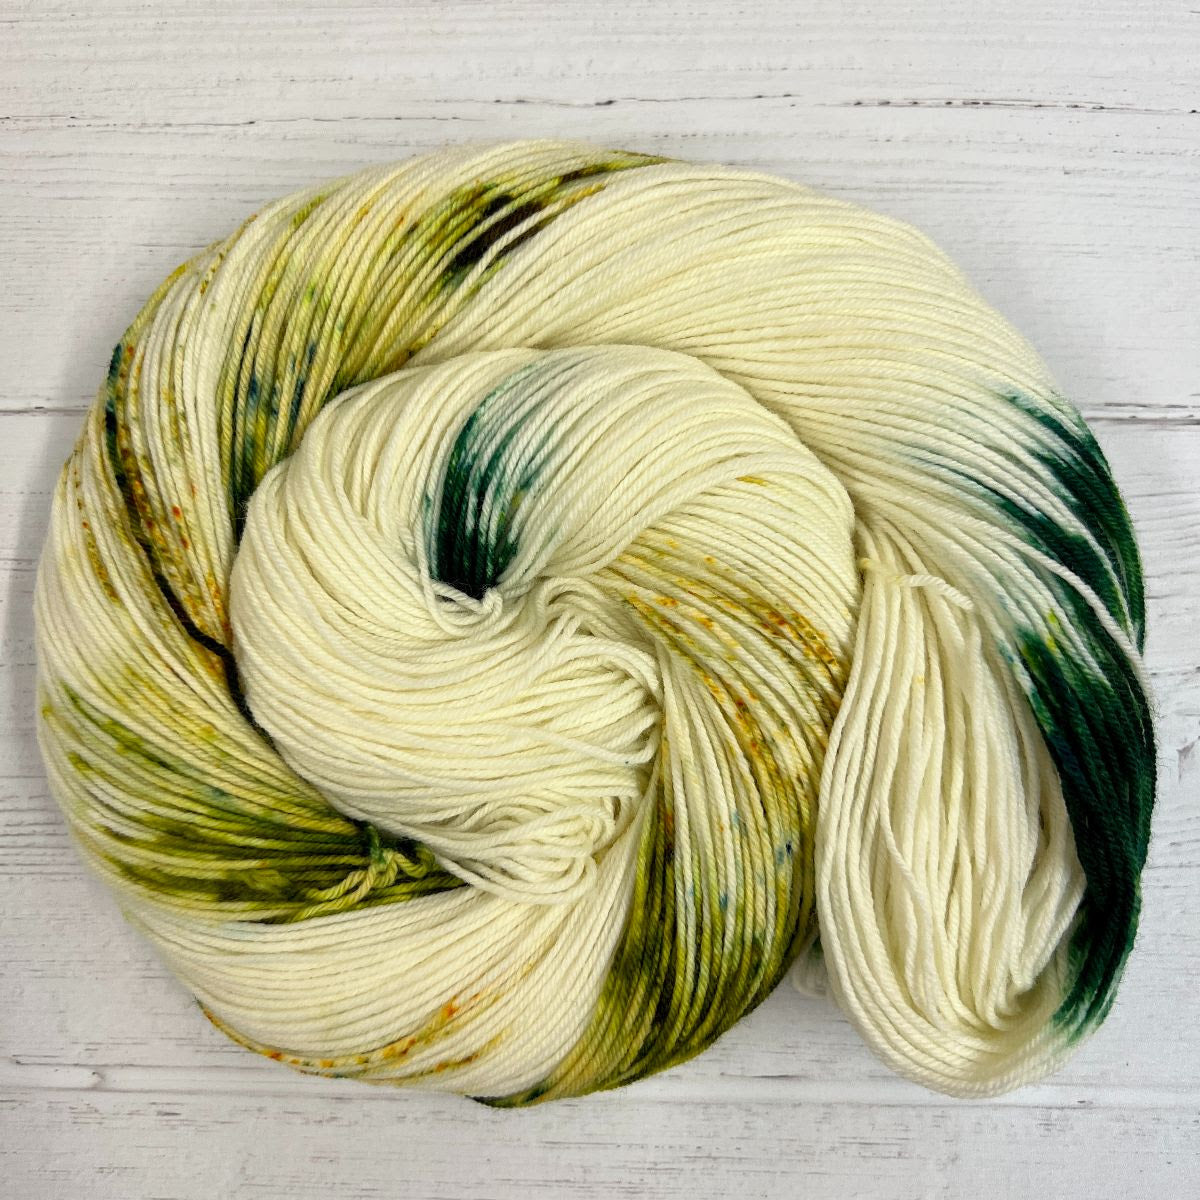 Herstory Nov 2022, Braiding Sweetgrass- cream and green skein wrapped into a swirl